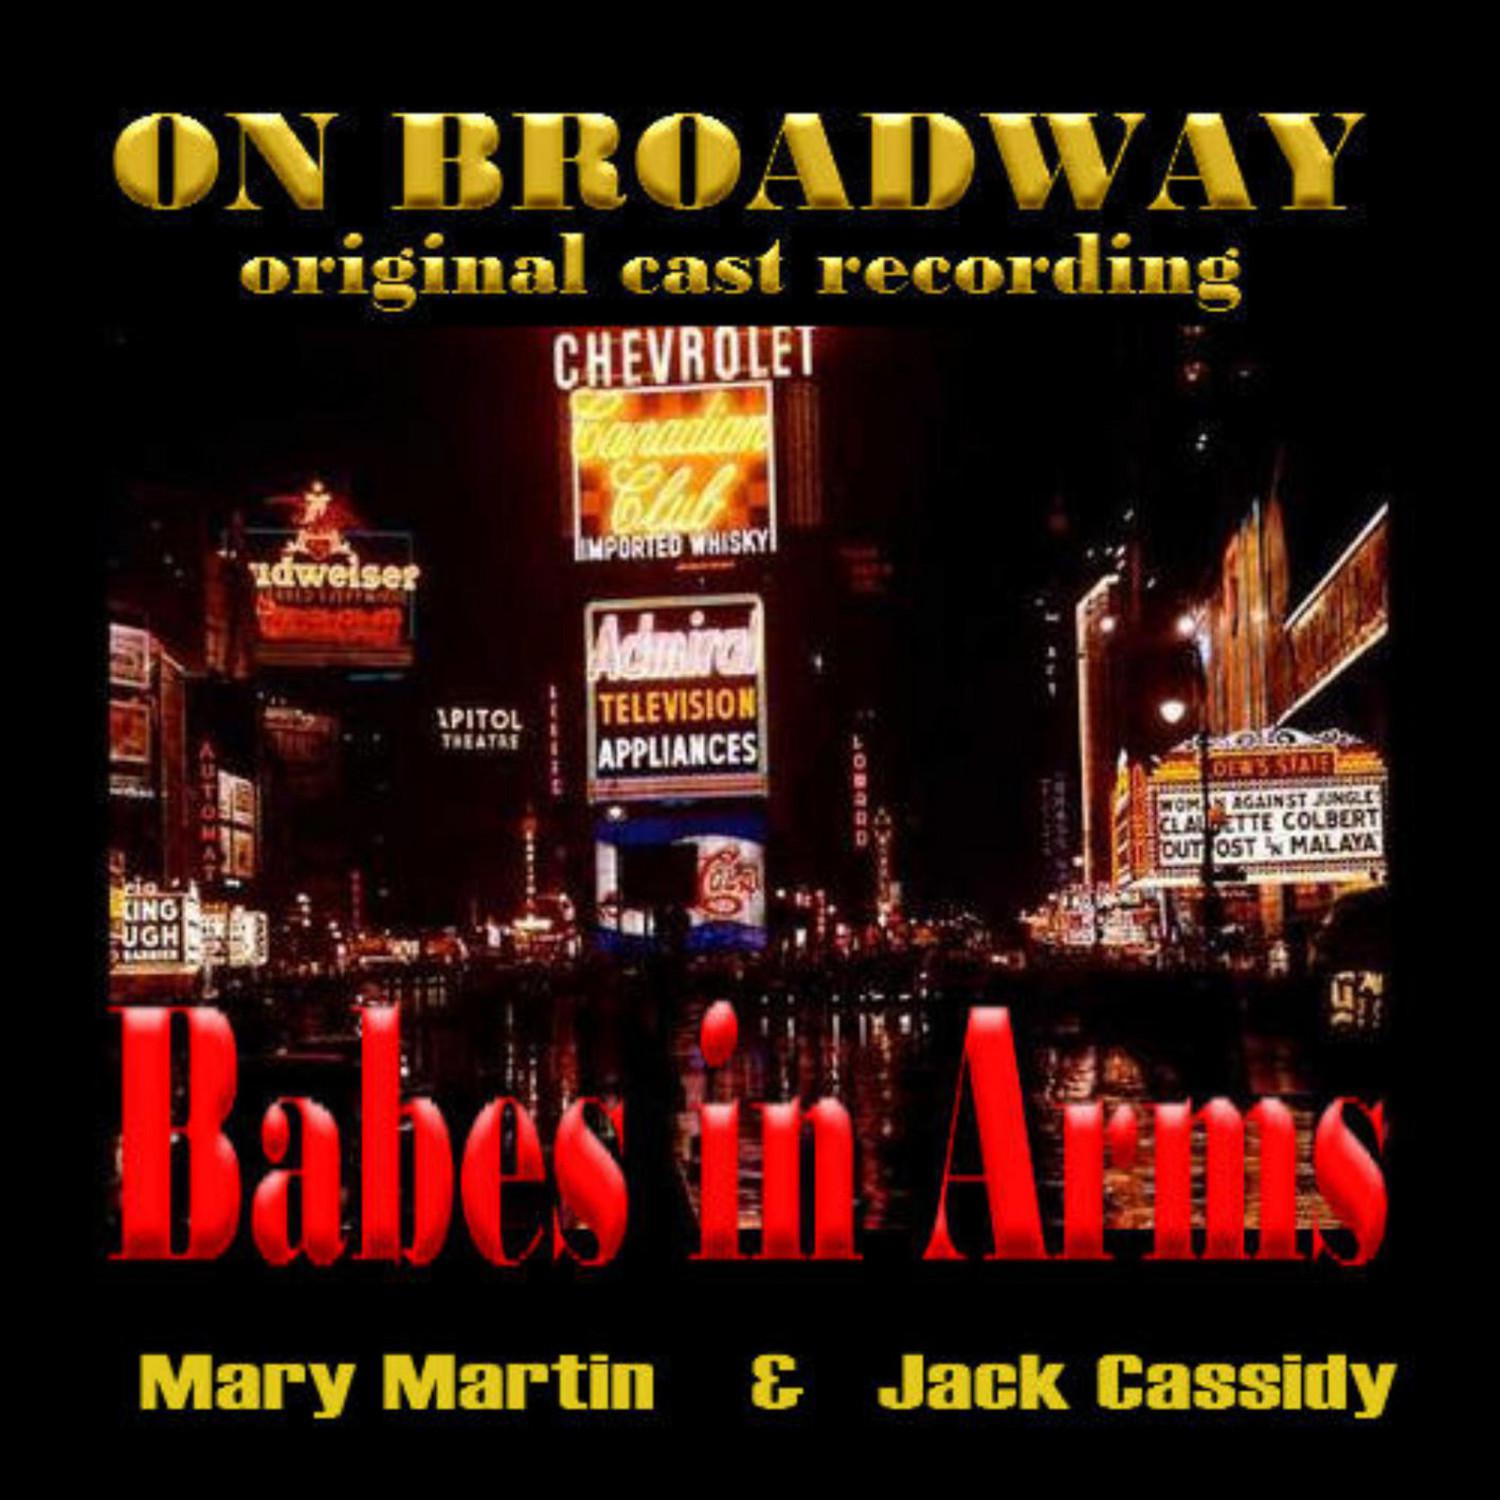 Babes in Arms Overture